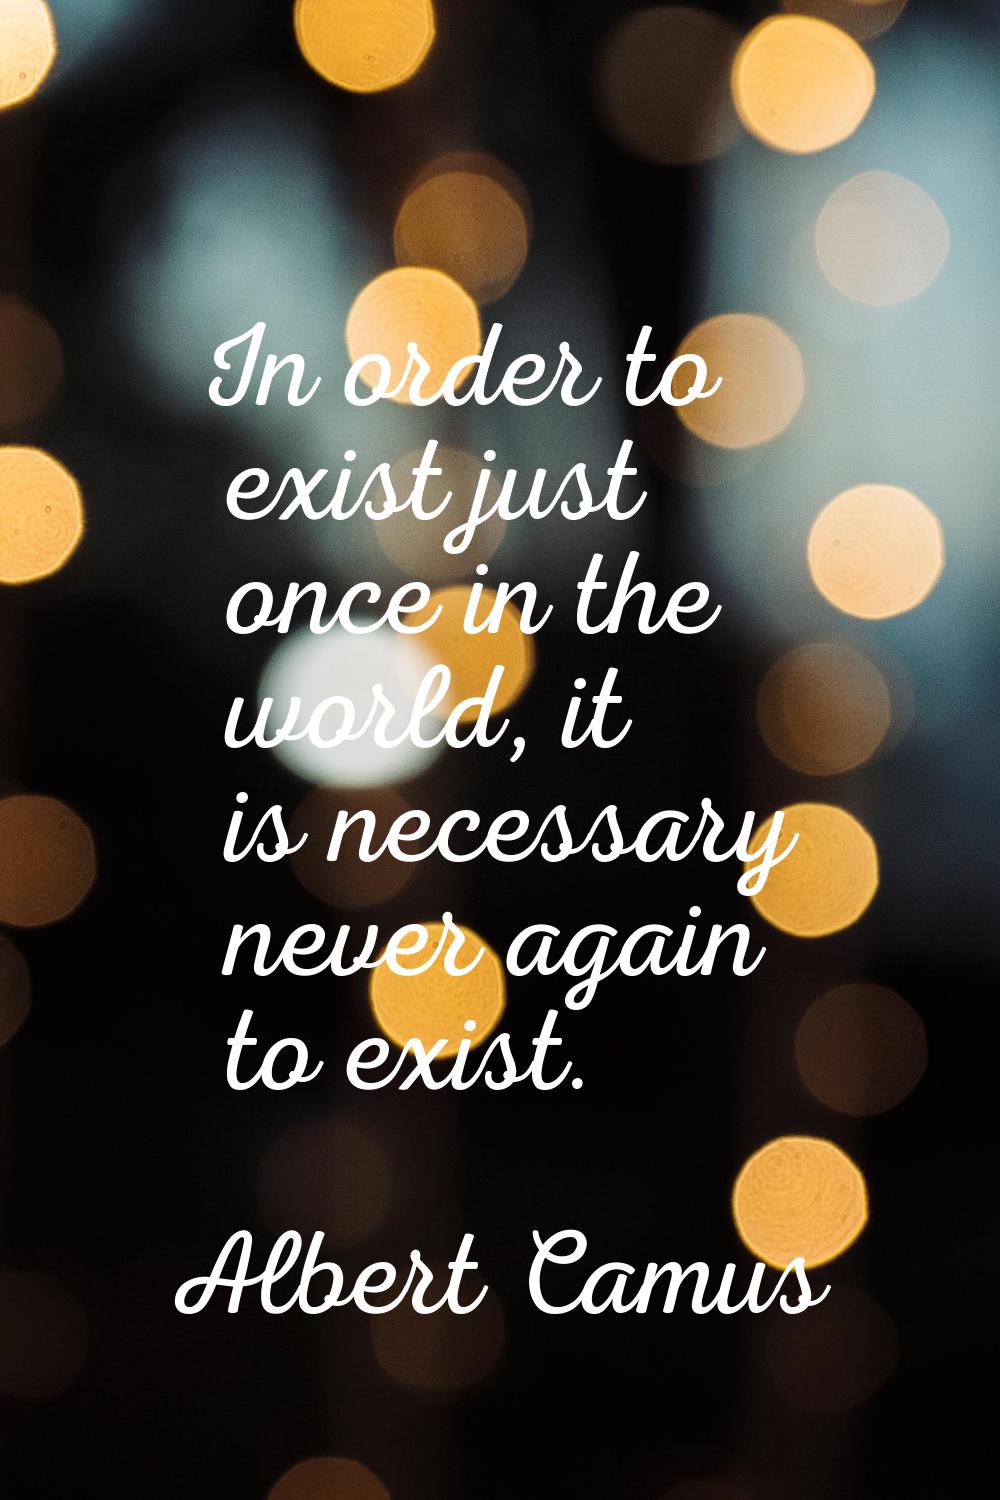 In order to exist just once in the world, it is necessary never again to exist.